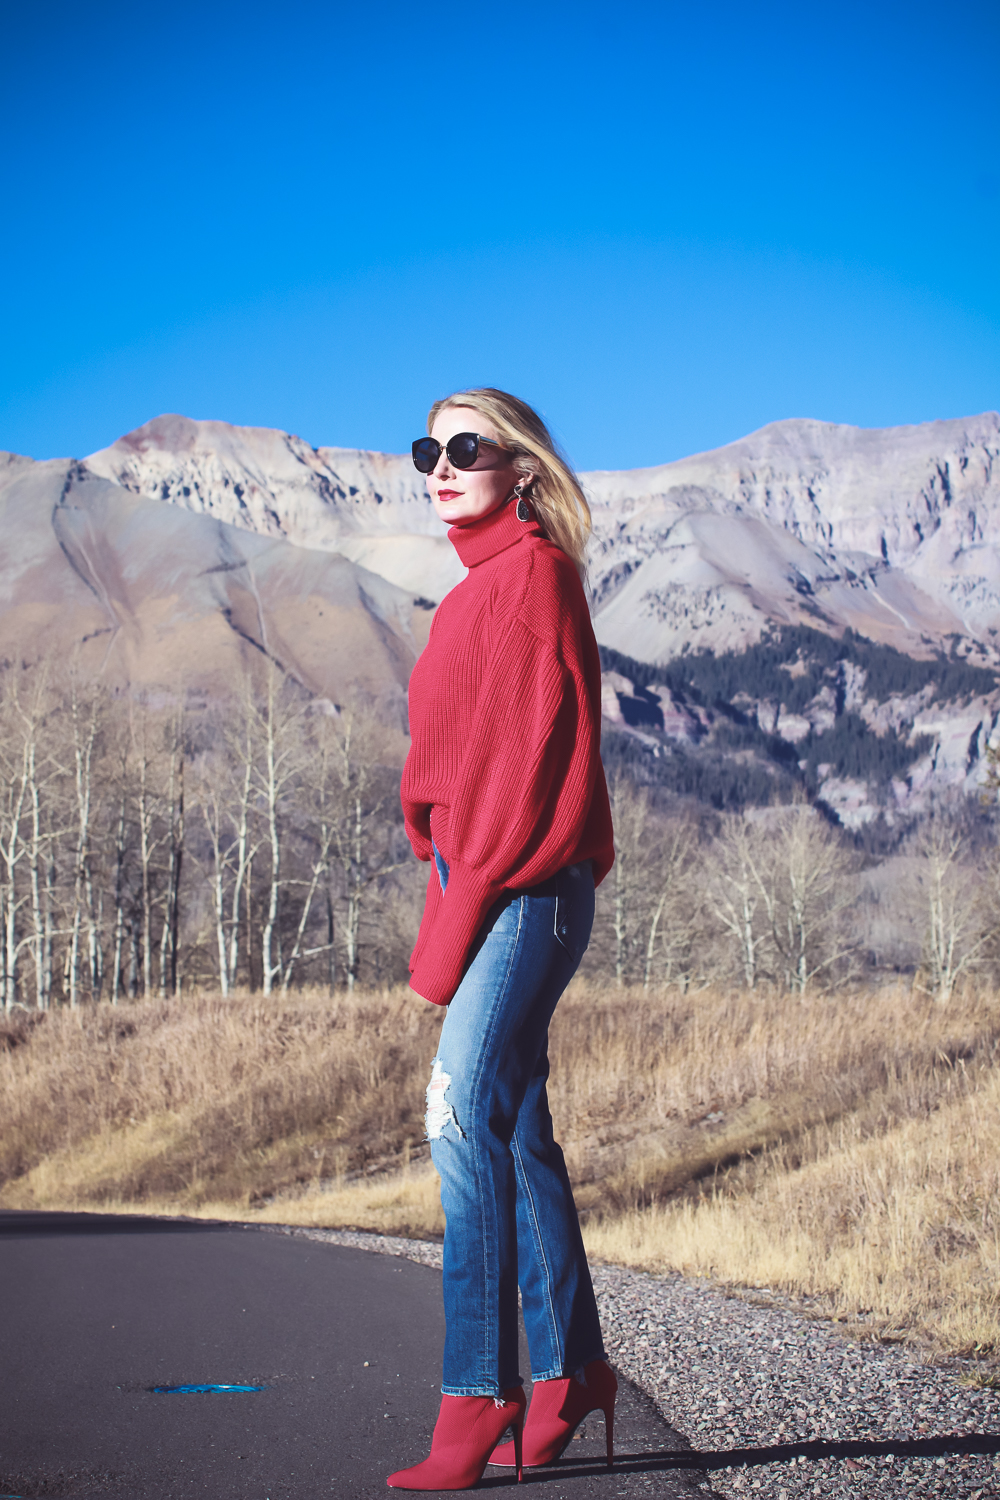 Sock Booties, what are they, how to style sock booties, featuring these red Steve Madden sock booties, Mother dazzler jeans, and a red oversized topshop turtleneck sweater on fashion blogger over 40, Erin Busbee of Busbee Style in Telluride Colorado